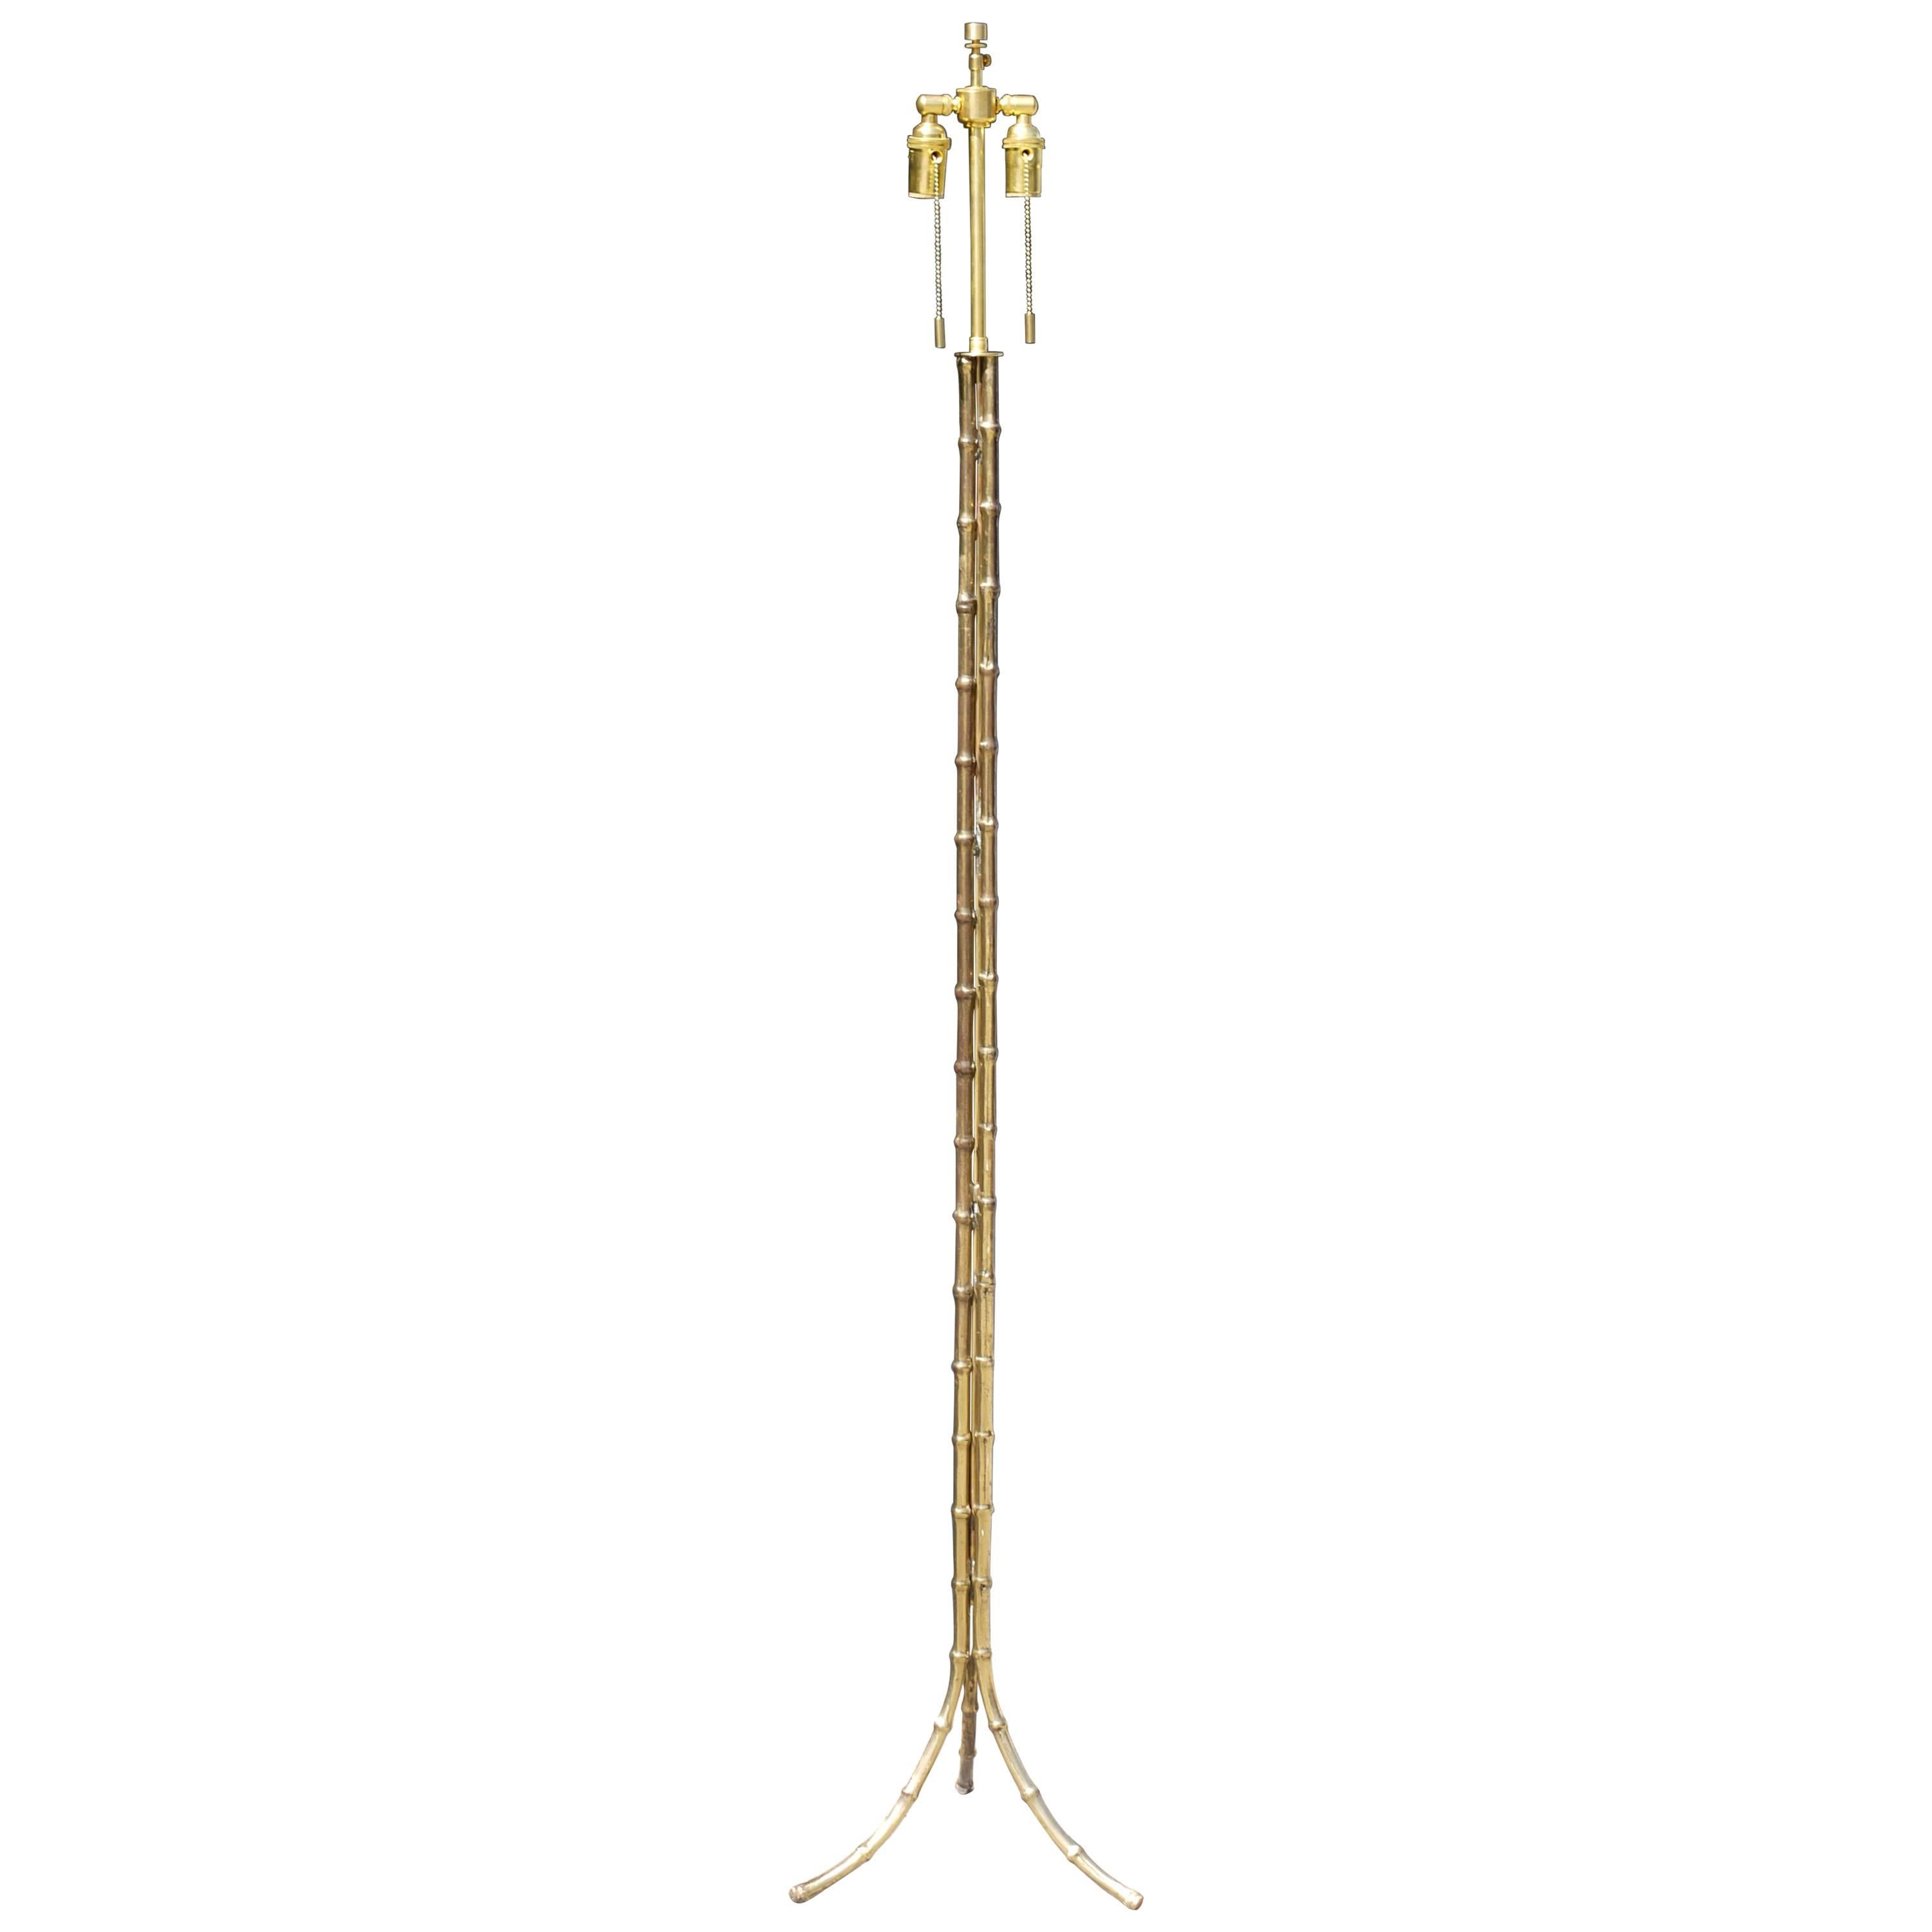 Polished Bronze Floor Lamp by Bagues